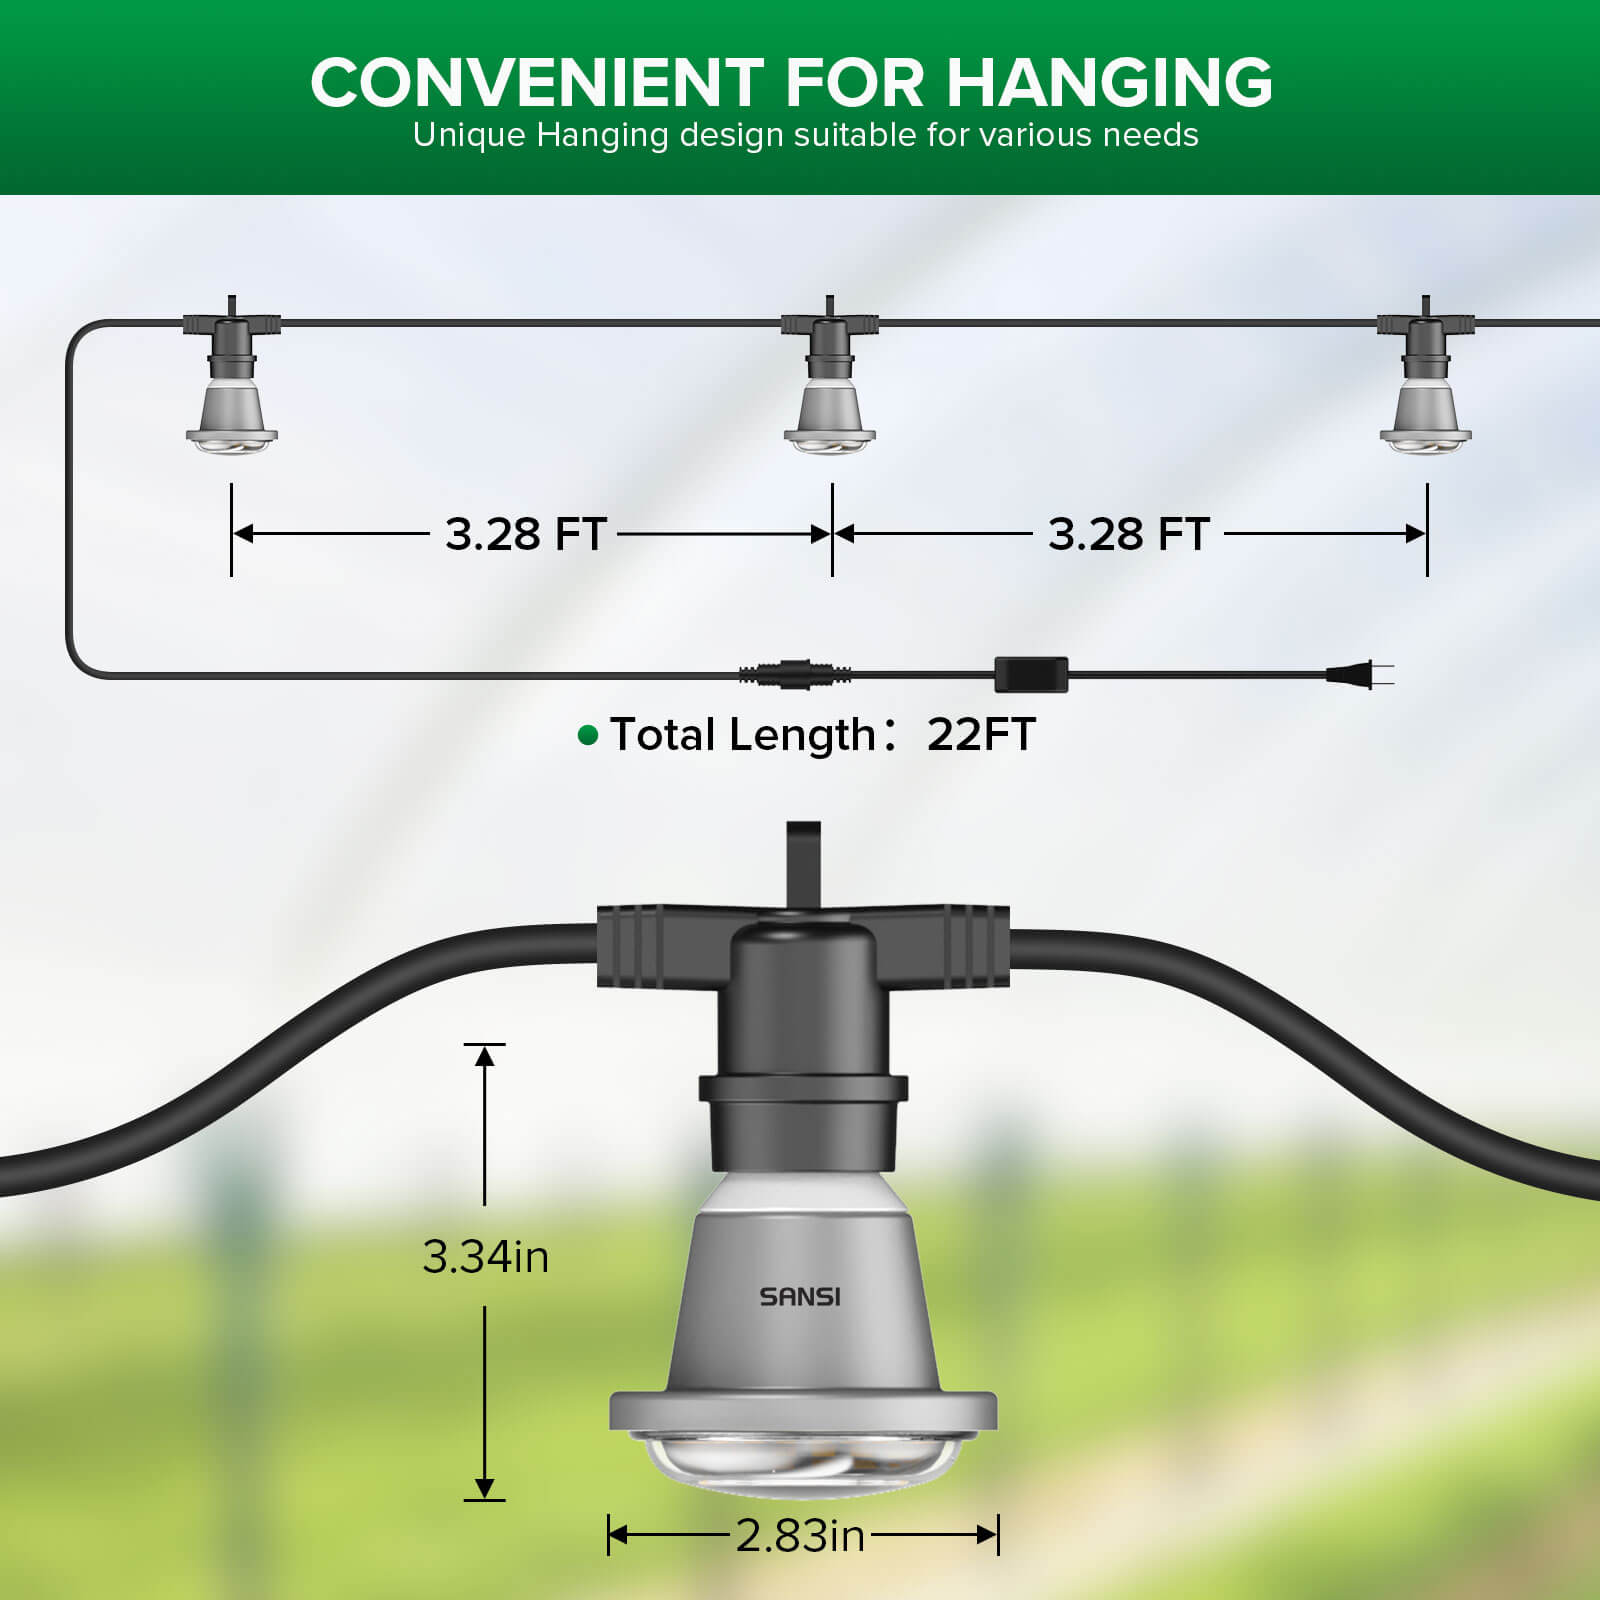 Hanging Grow Light String, total length: 22FT.The distance between bulbs is 3.28FT